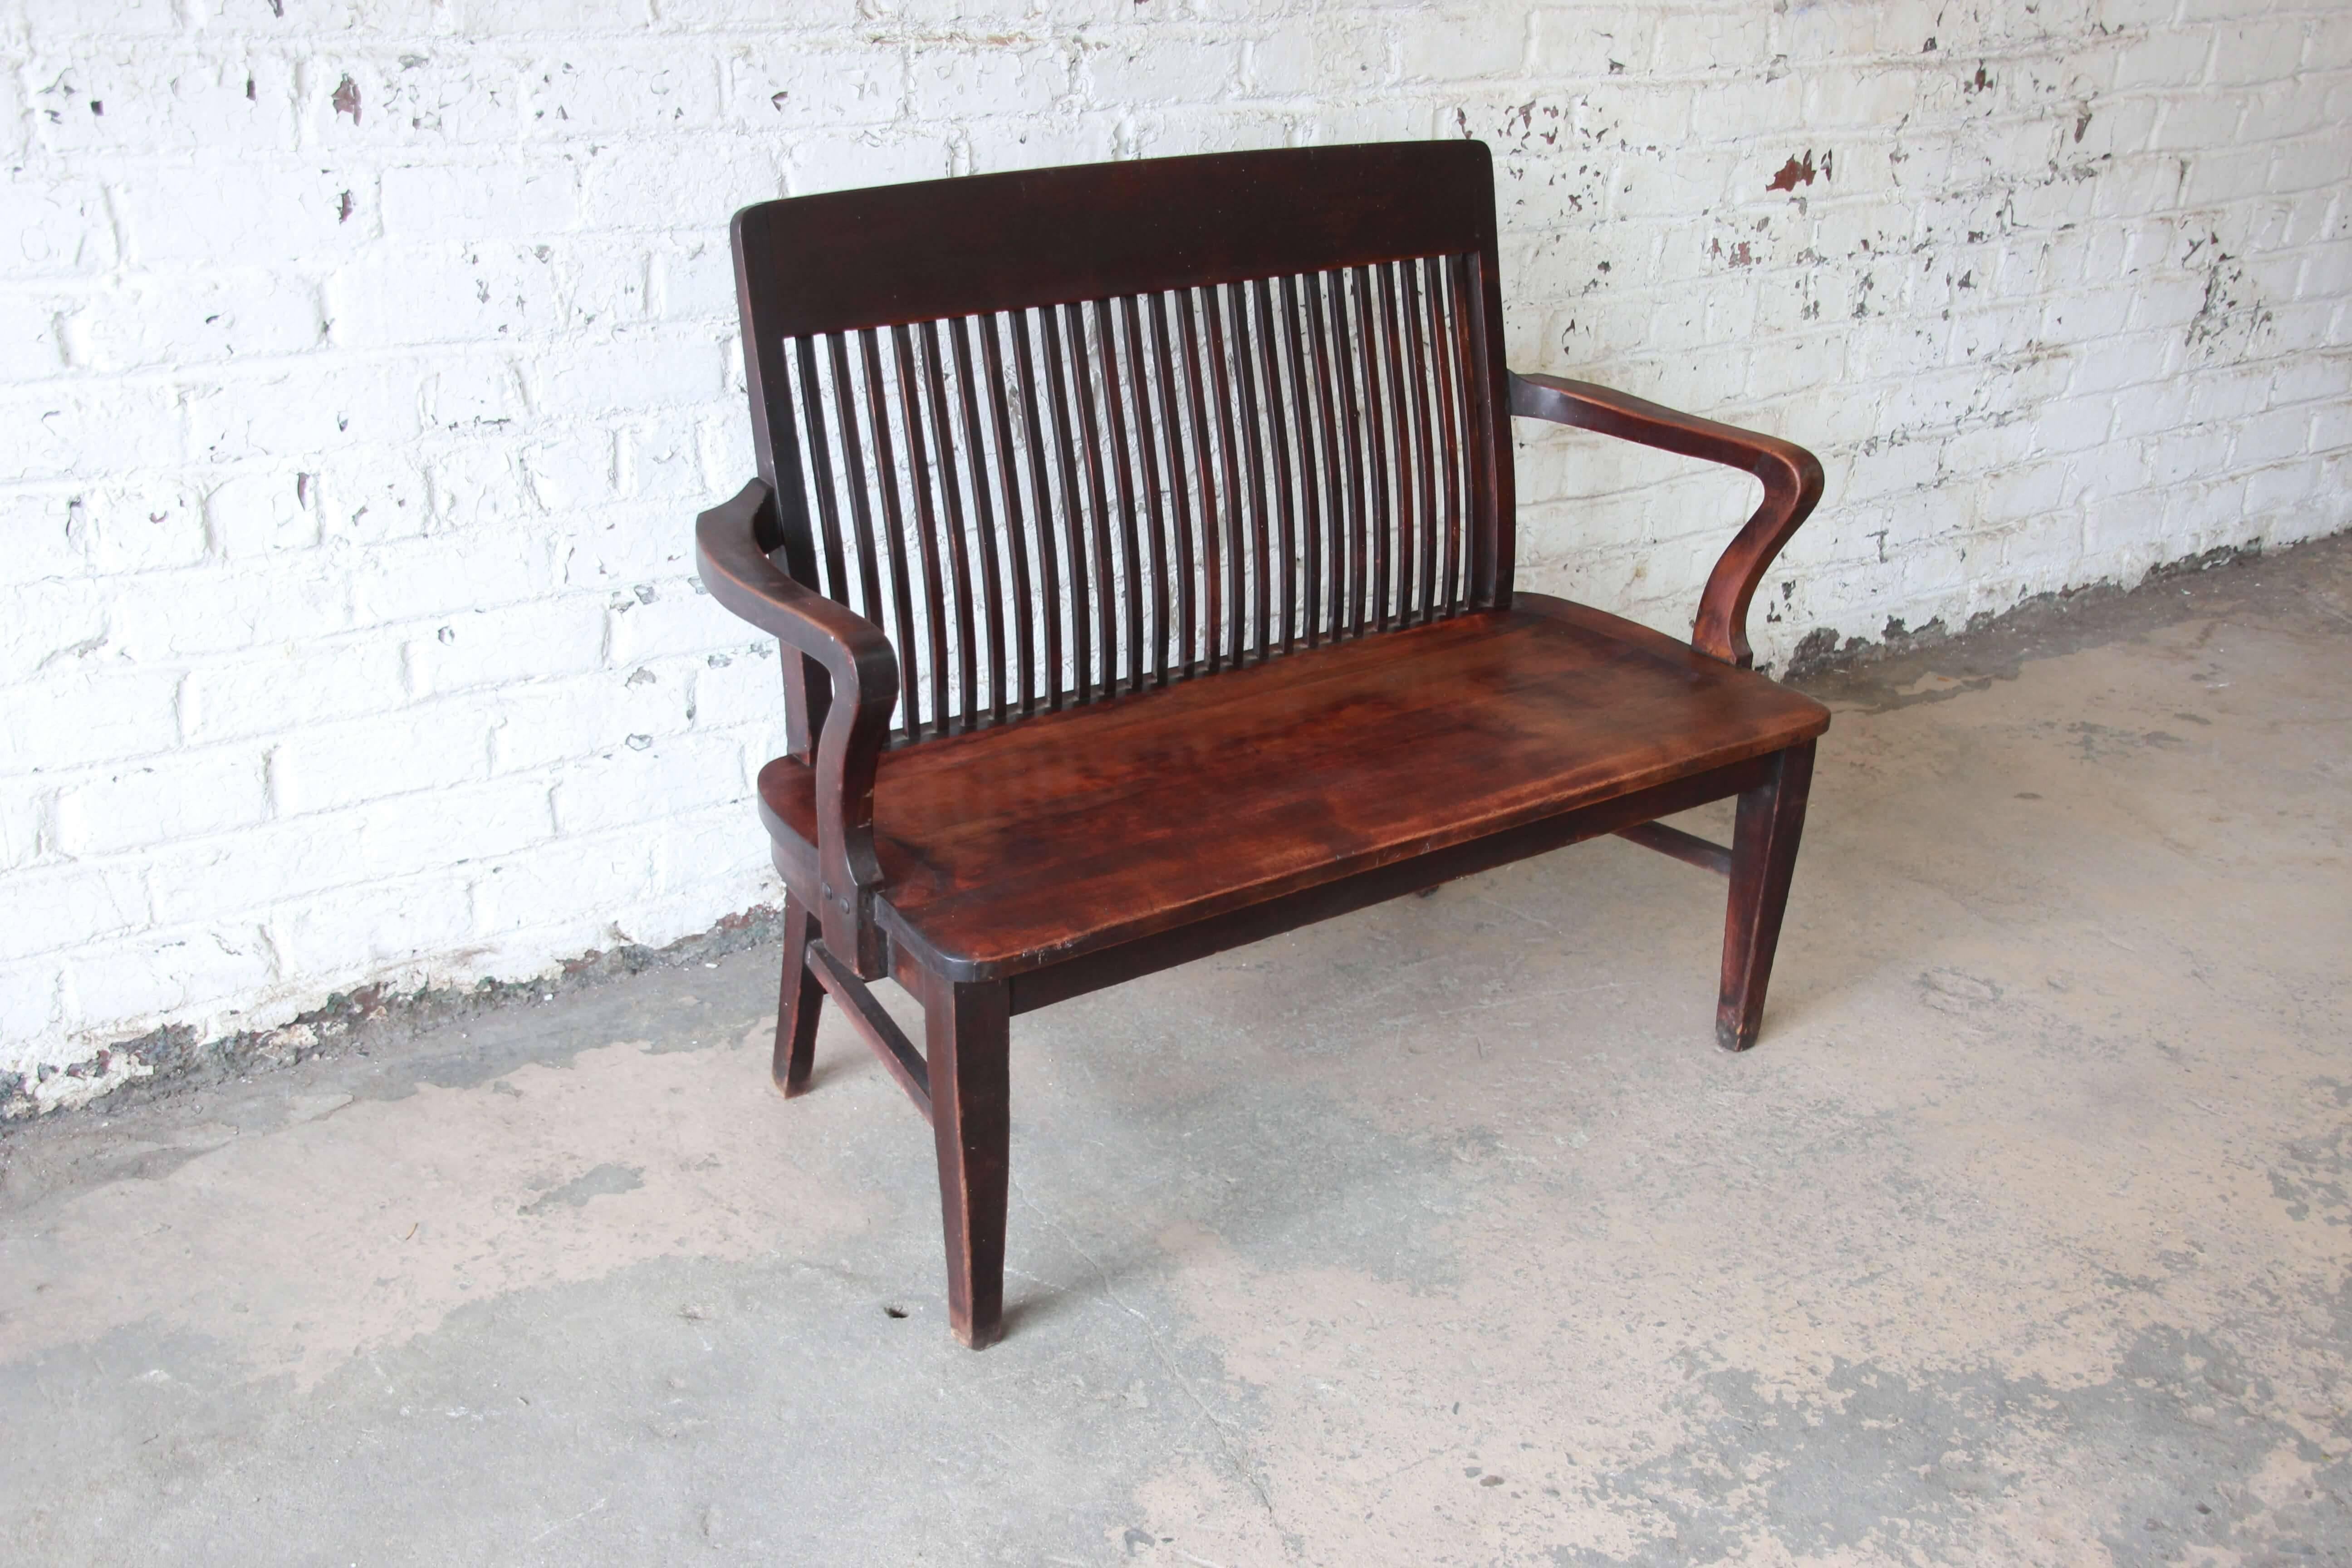 Offering a fantastic mahogany banker's bench from the early 1900s. The bench was manufactured by the Milwaukee Chair Co. It sits comfortably and the back slats and joinery is sturdy. It has a nice patina and would serve in a multitude of different